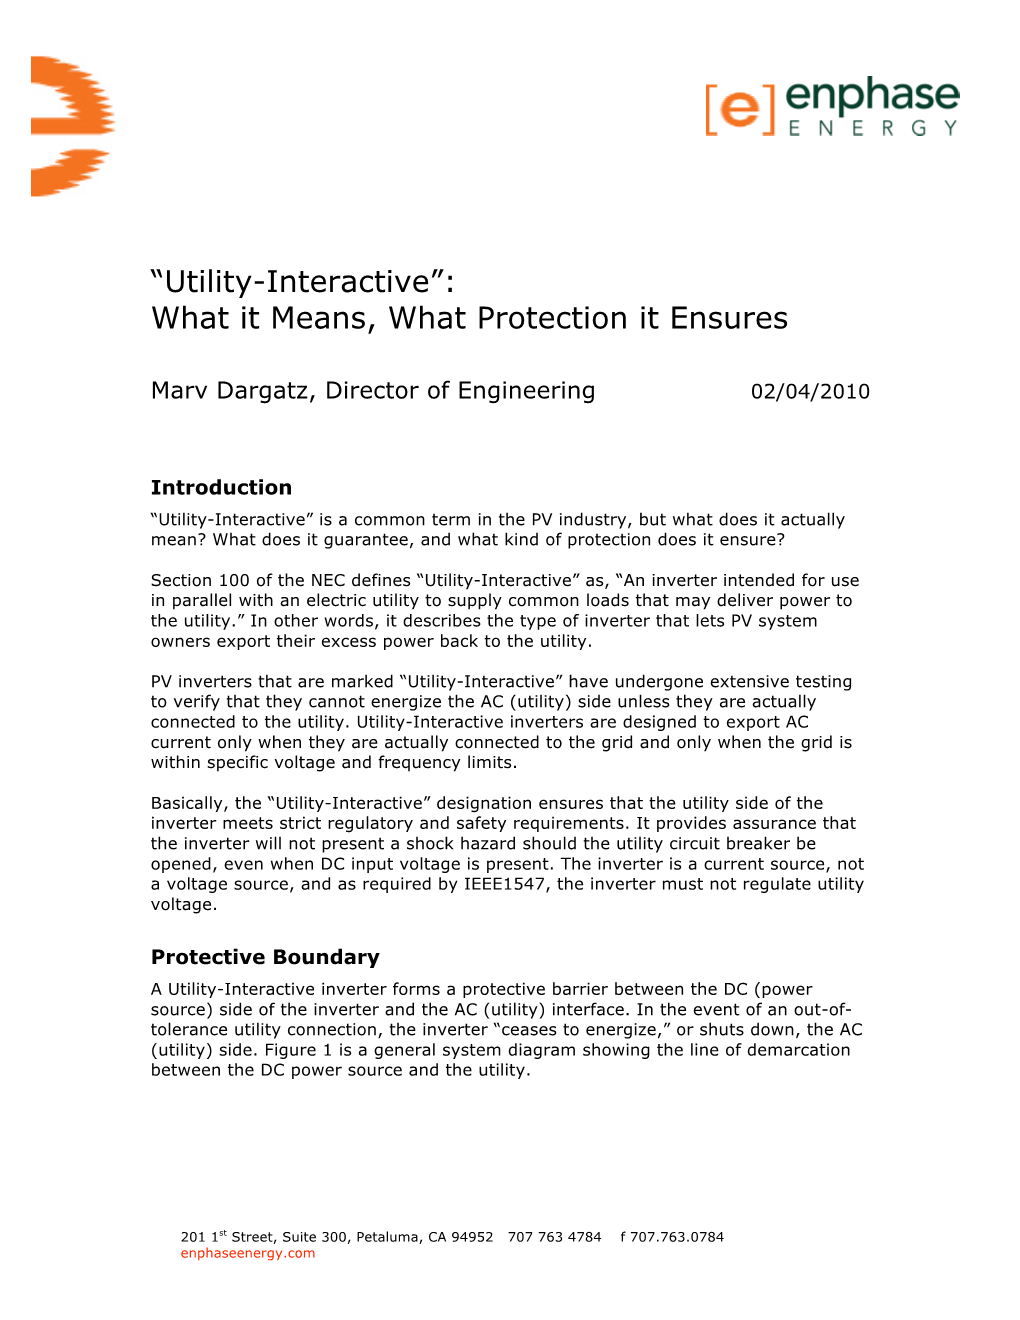 Utility-Interactive”: What It Means, What Protection It Ensures